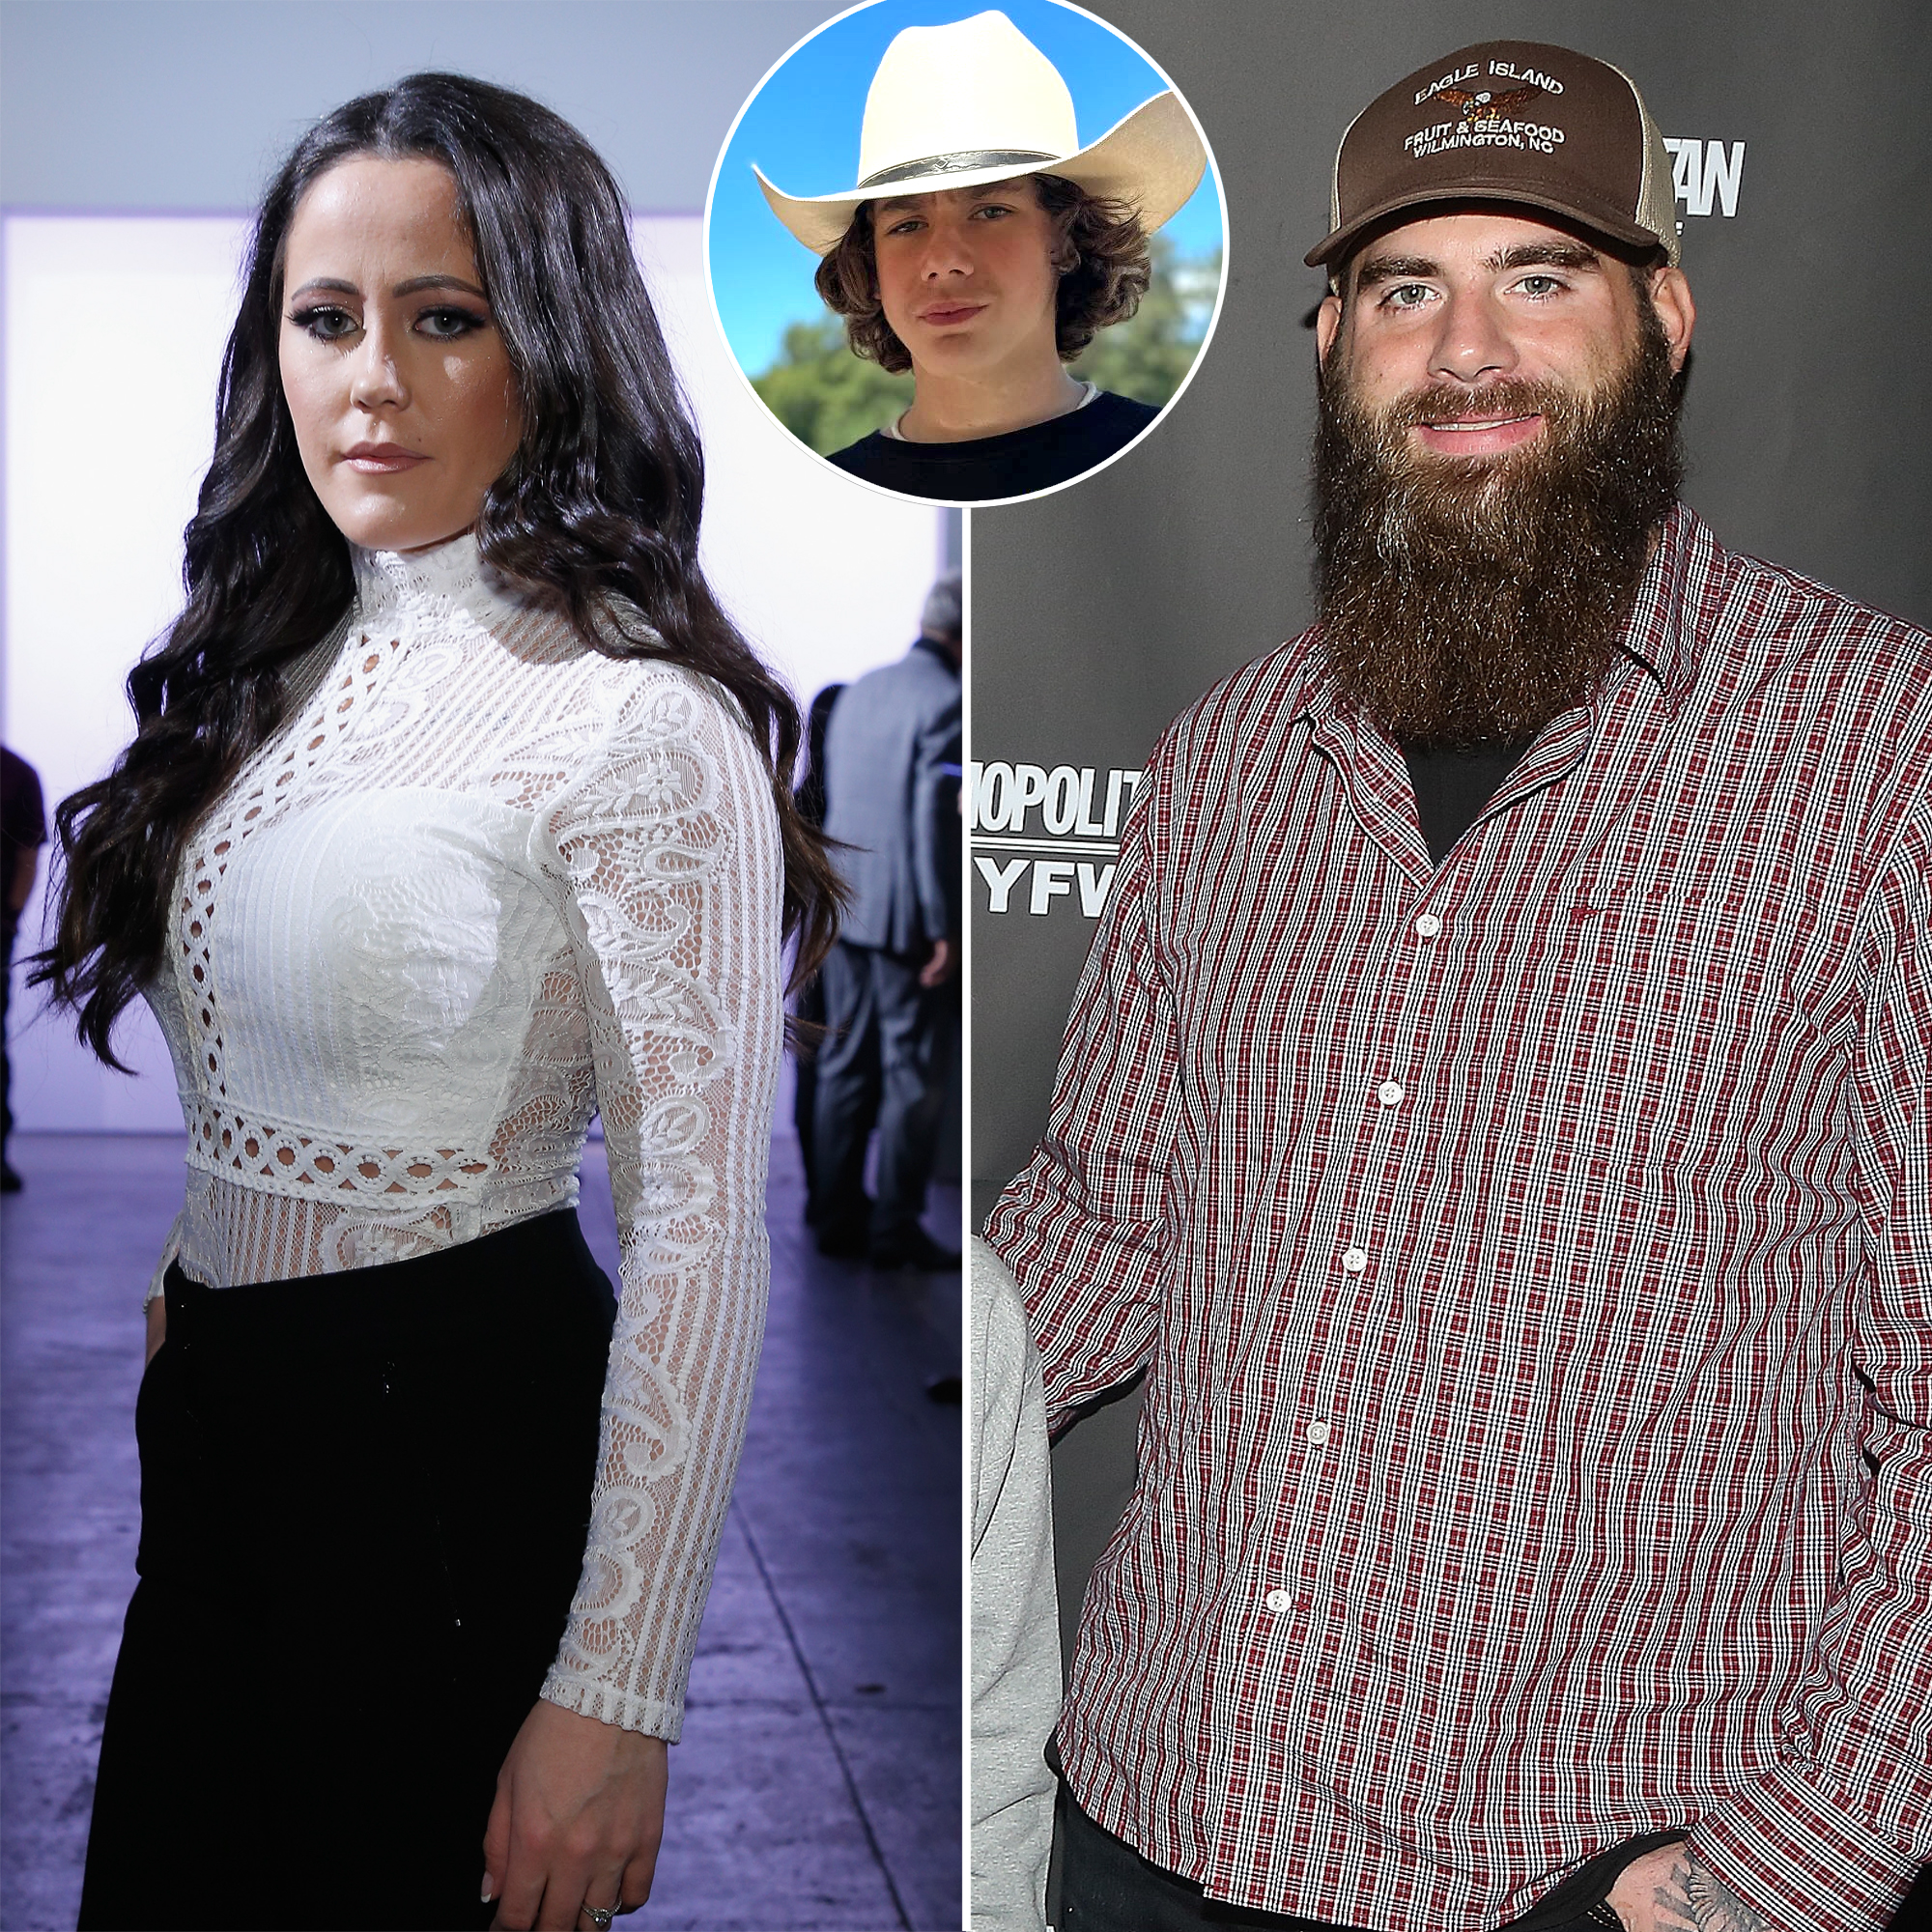 Teen Mom 2 Alum Jenelle Evans Denies Sons Runaway Has to Do With Husband